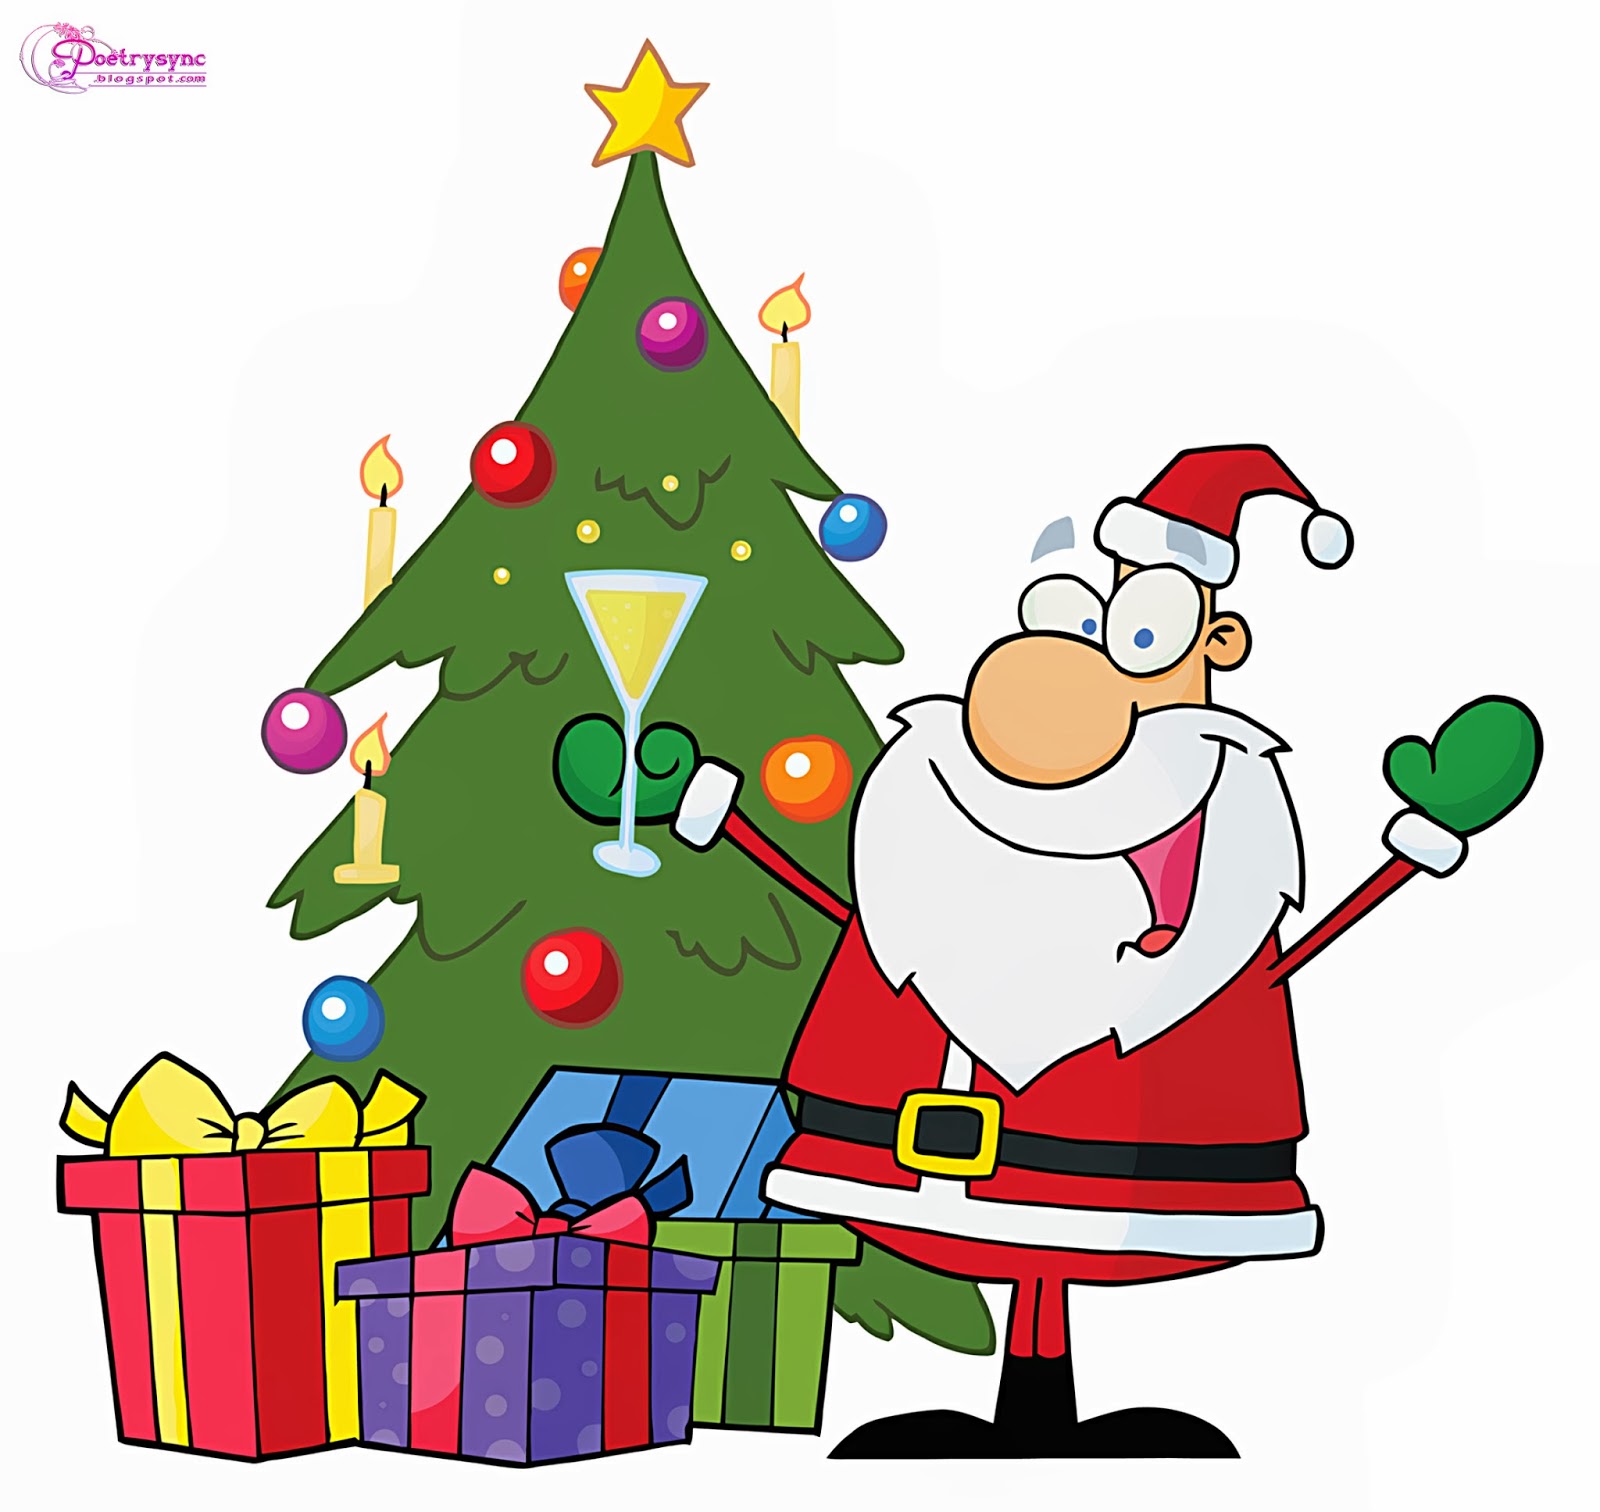 happy new year: Santa Claus HD Cliparts and Pictures for Christmas ...